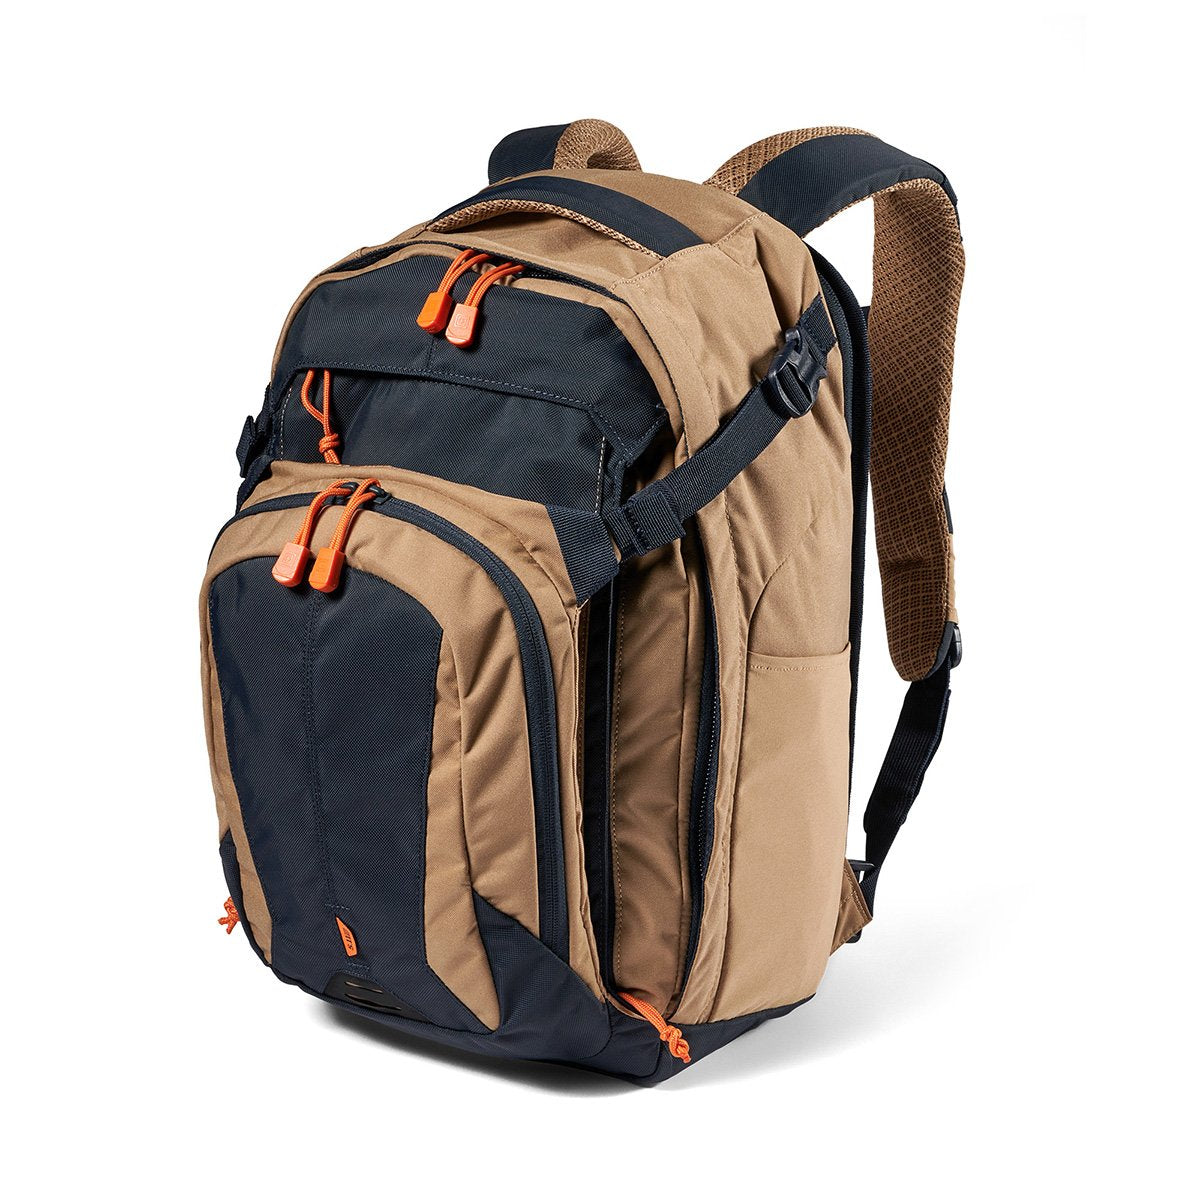 5.11 Tactical COVRT18 2.0 Backpack 32L Bags, Packs and Cases 5.11 Tactical Kangaroo Tactical Gear Supplier Tactical Distributors Australia